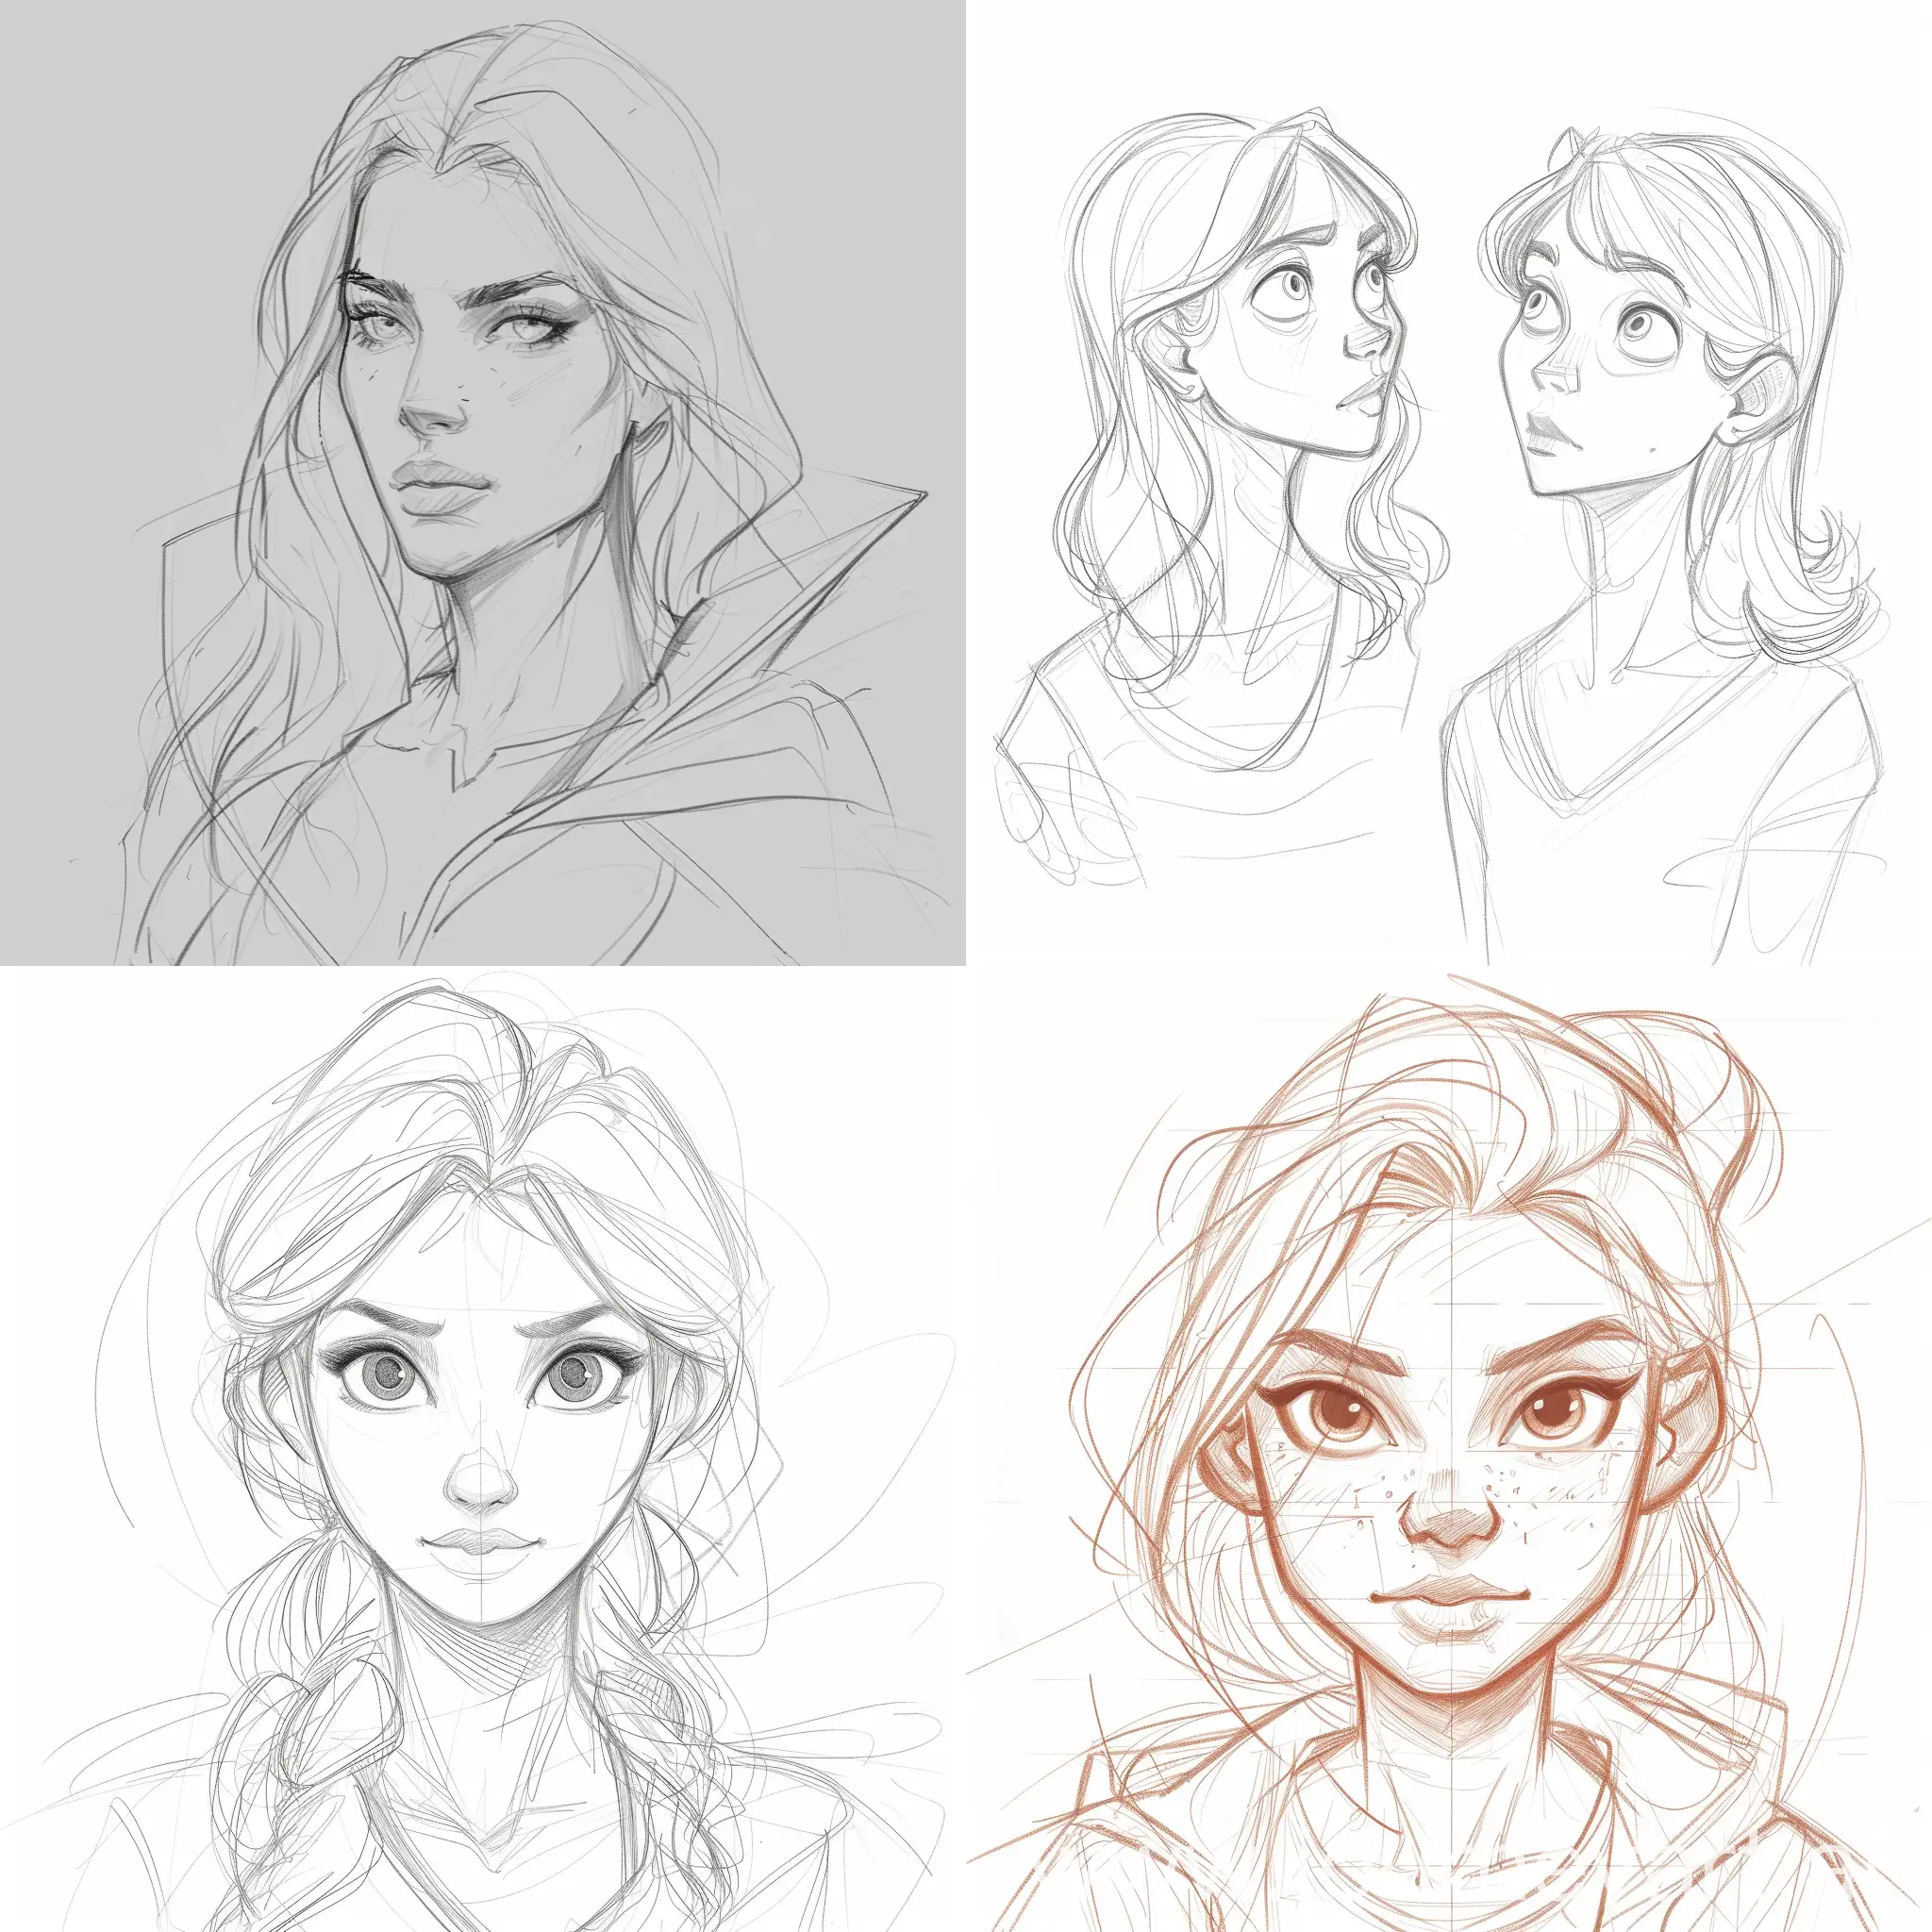 Hello Amanda  These are not finished sketches, but rather random sketches to agree on the final shape before I do the final sketch before coloring.  I want to know from you which one is better and if you have any modifications?